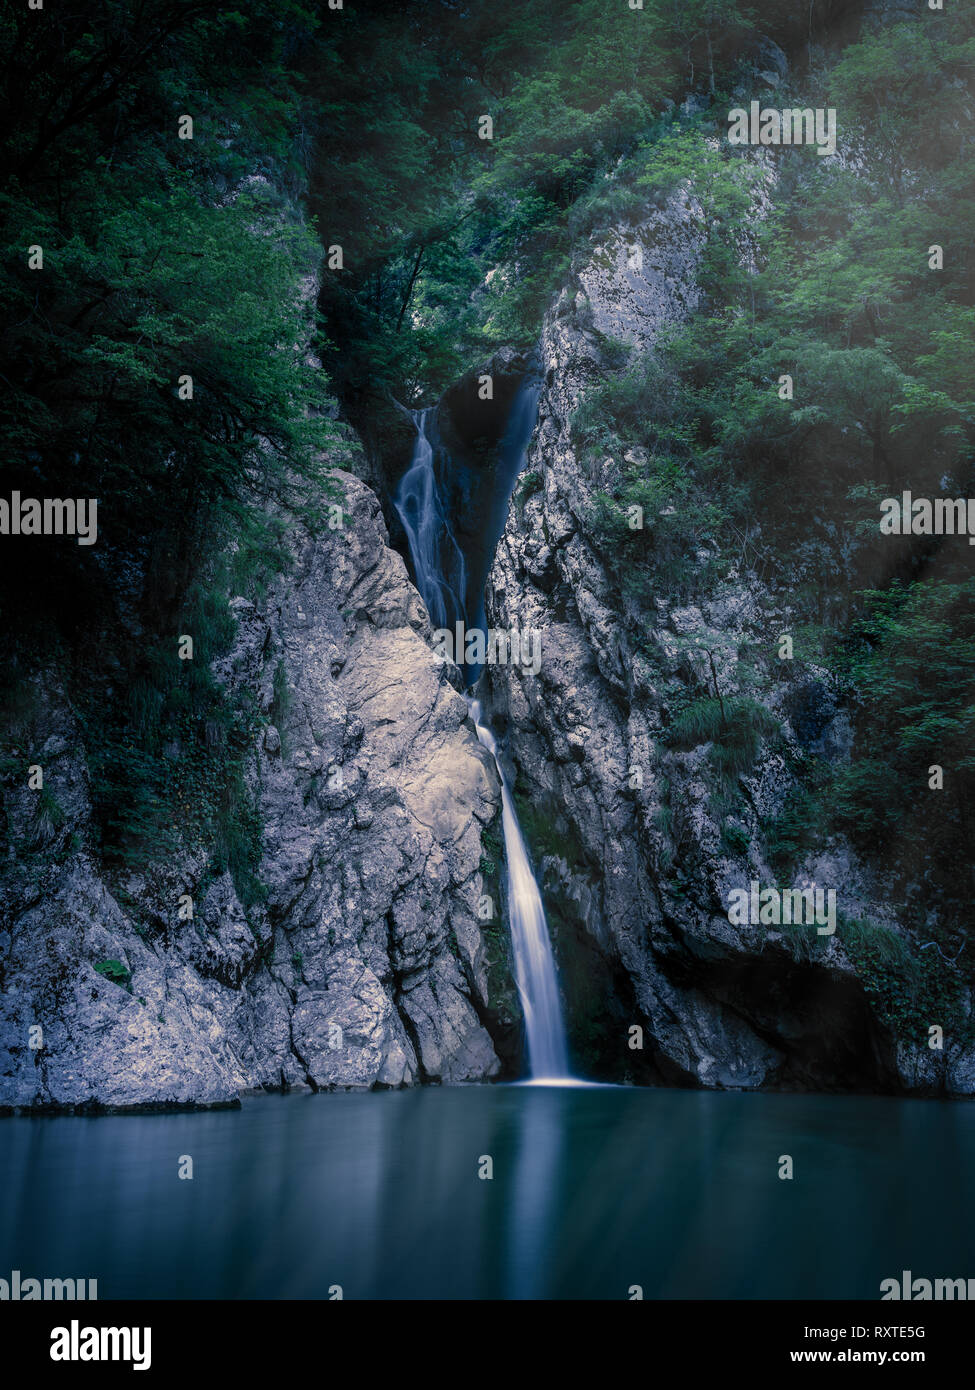 A tall waterfall falls from a cliff into a clear lake at night, lit by the  light of the moon. The waterfall is surrounded by green forest. River Agura  Stock Photo -